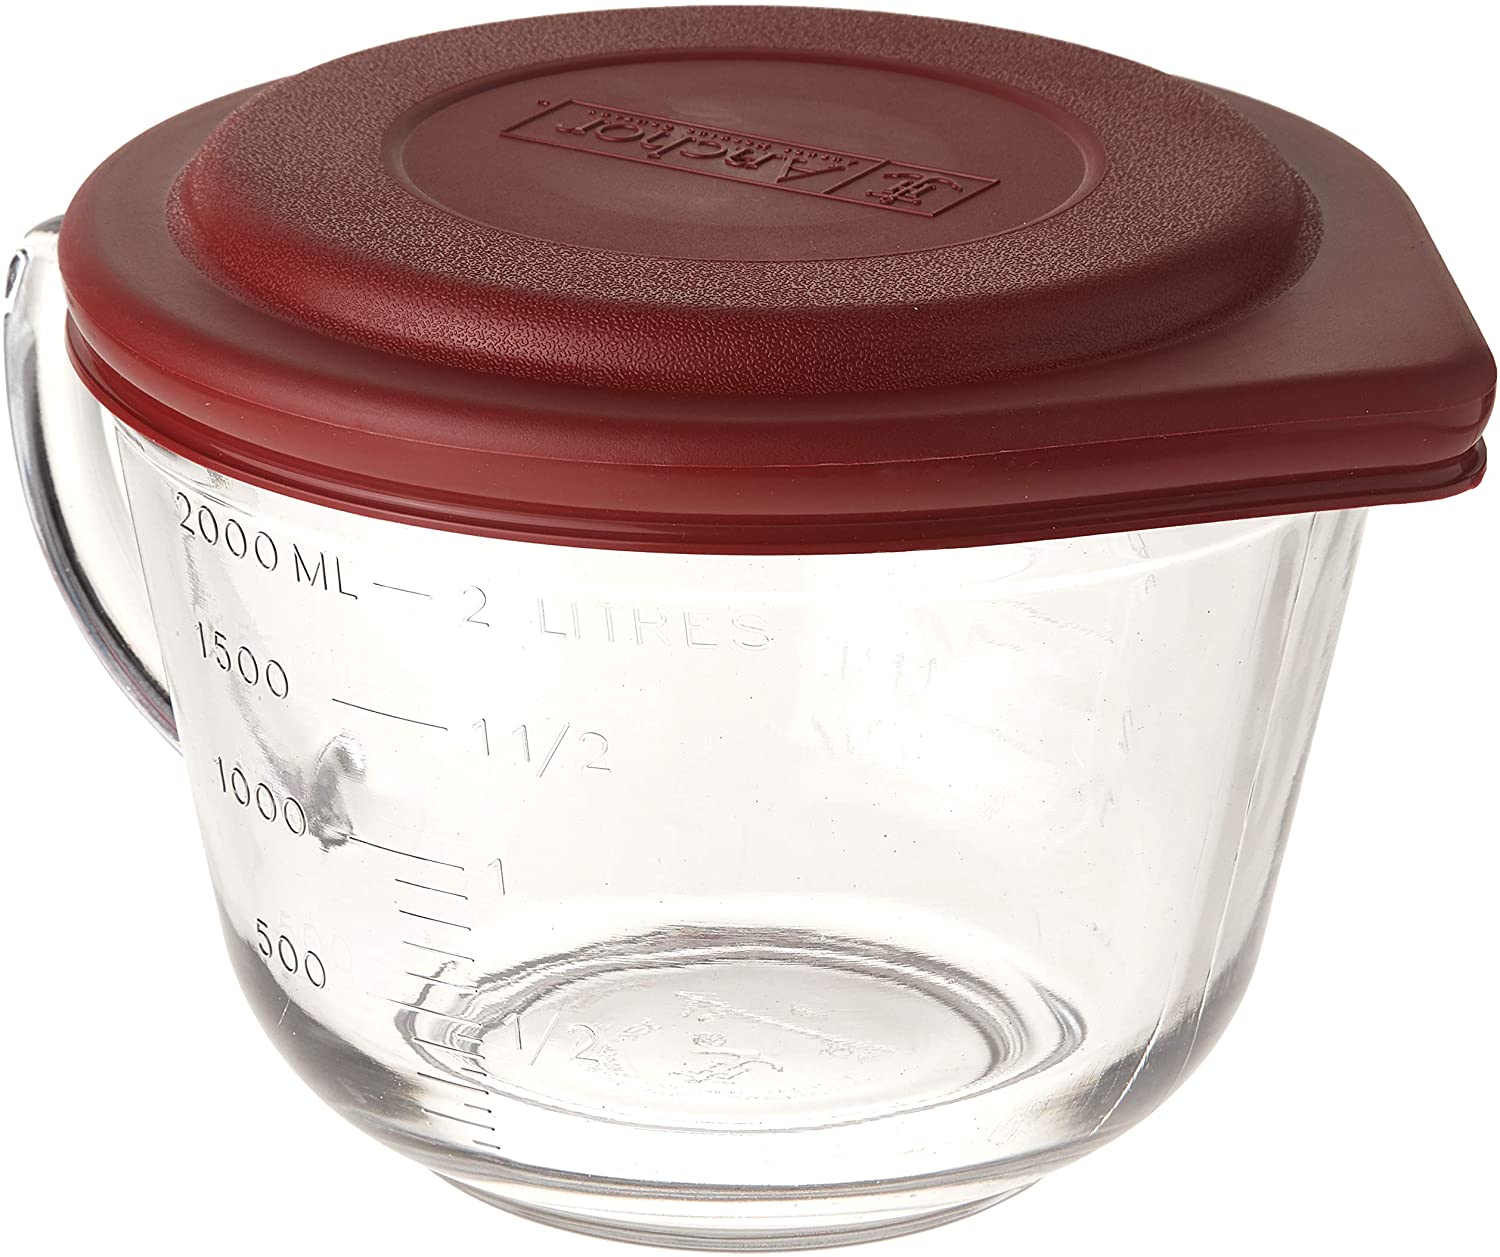 Anchor Hocking 91557AHG17 2 Qt. (8 Cups) Glass Measuring Cup / Batter Bowl  with Red Lid